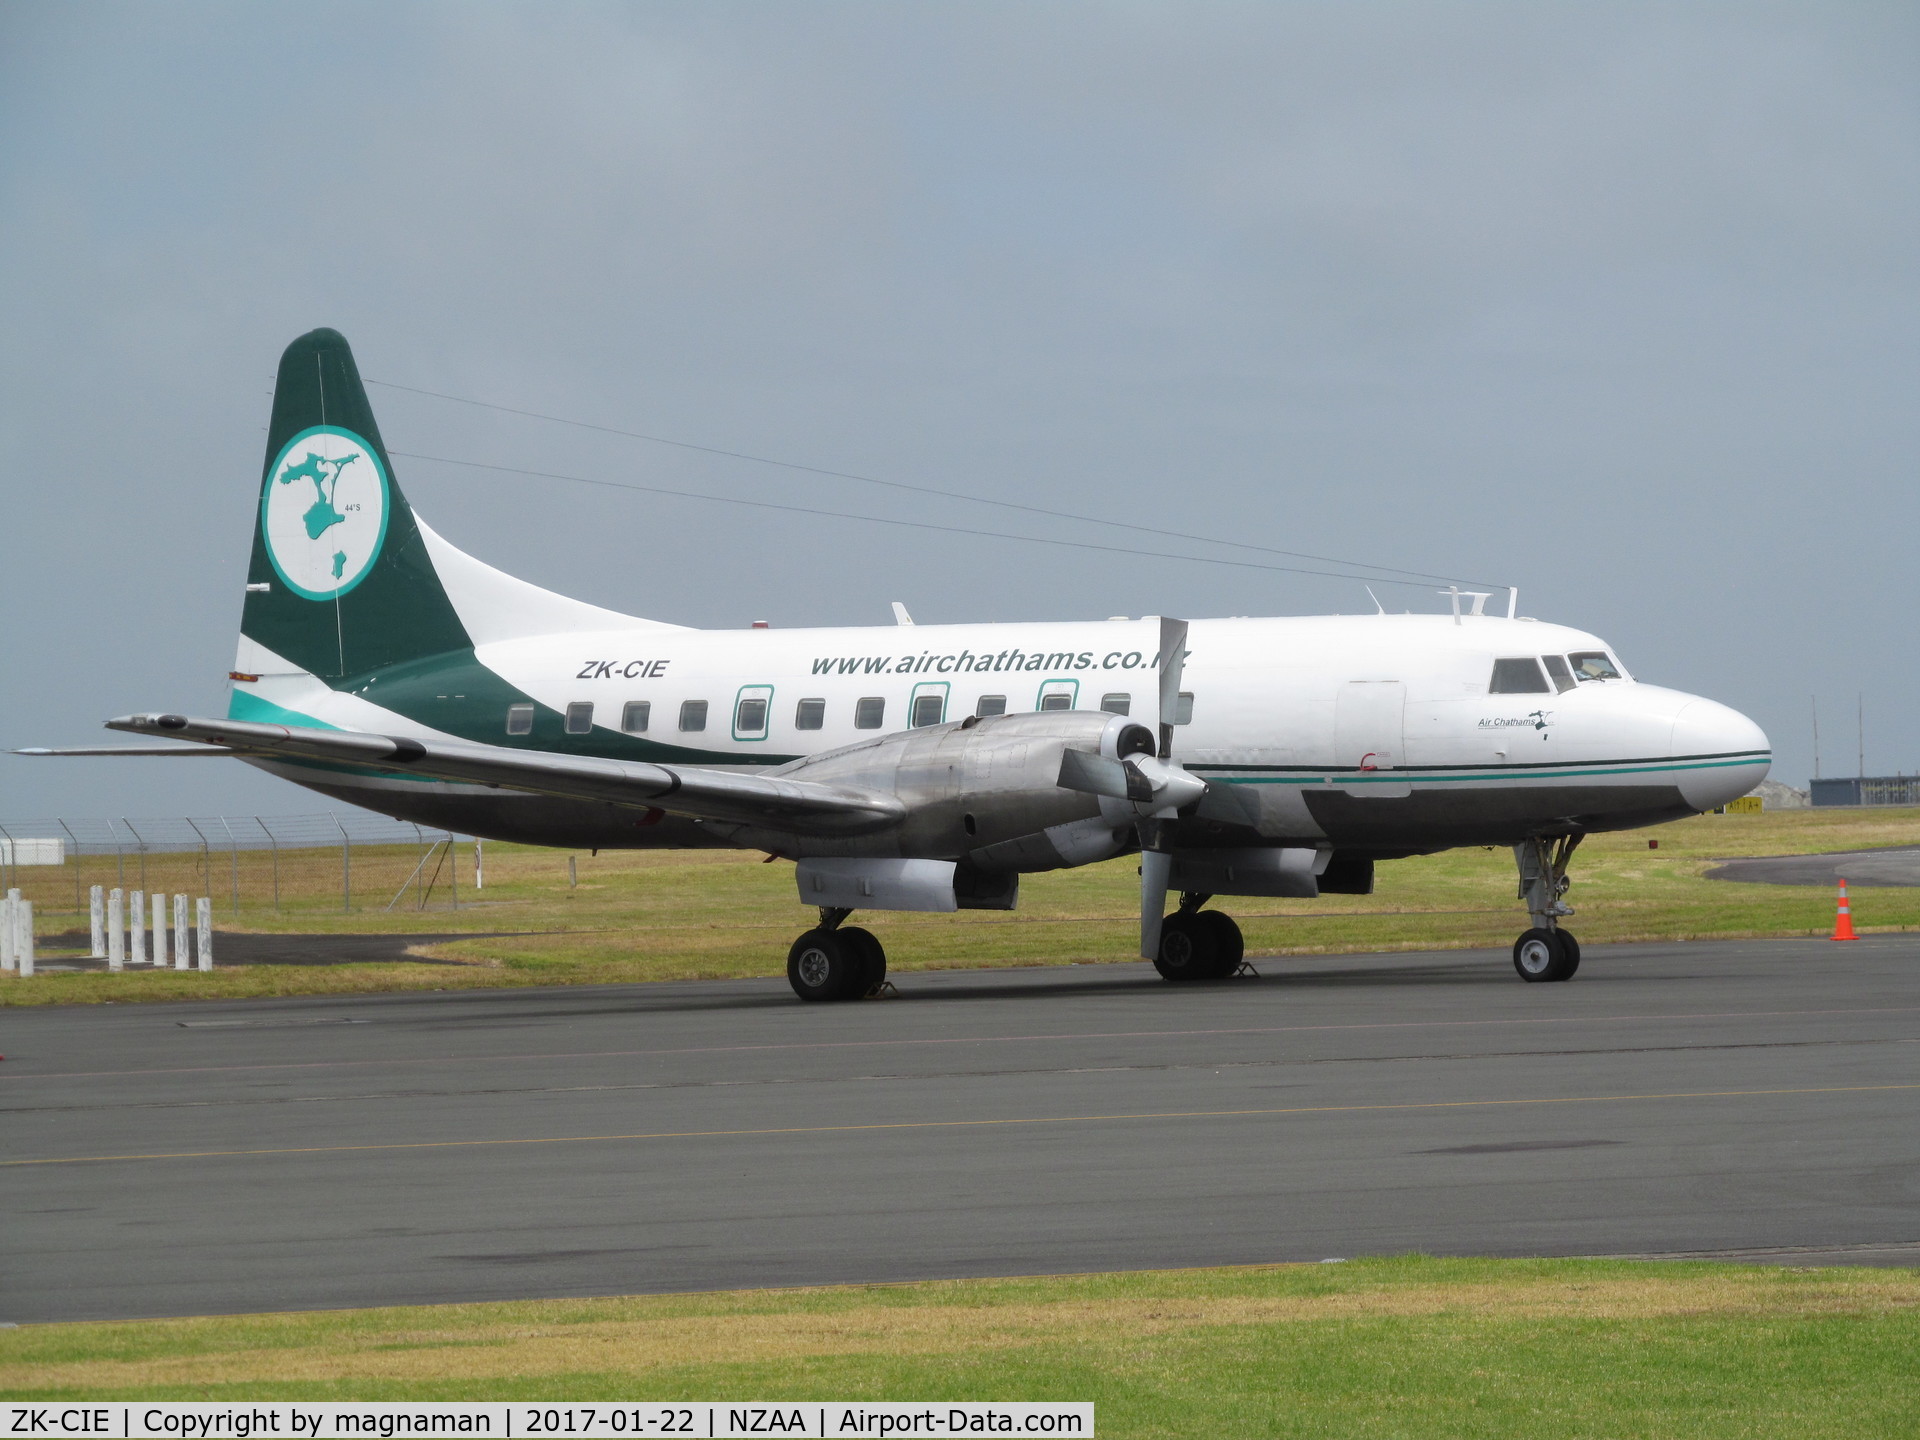 ZK-CIE, 1957 Convair 580 C/N 399, on convair apron - seen today along with CIB/CIC and CID